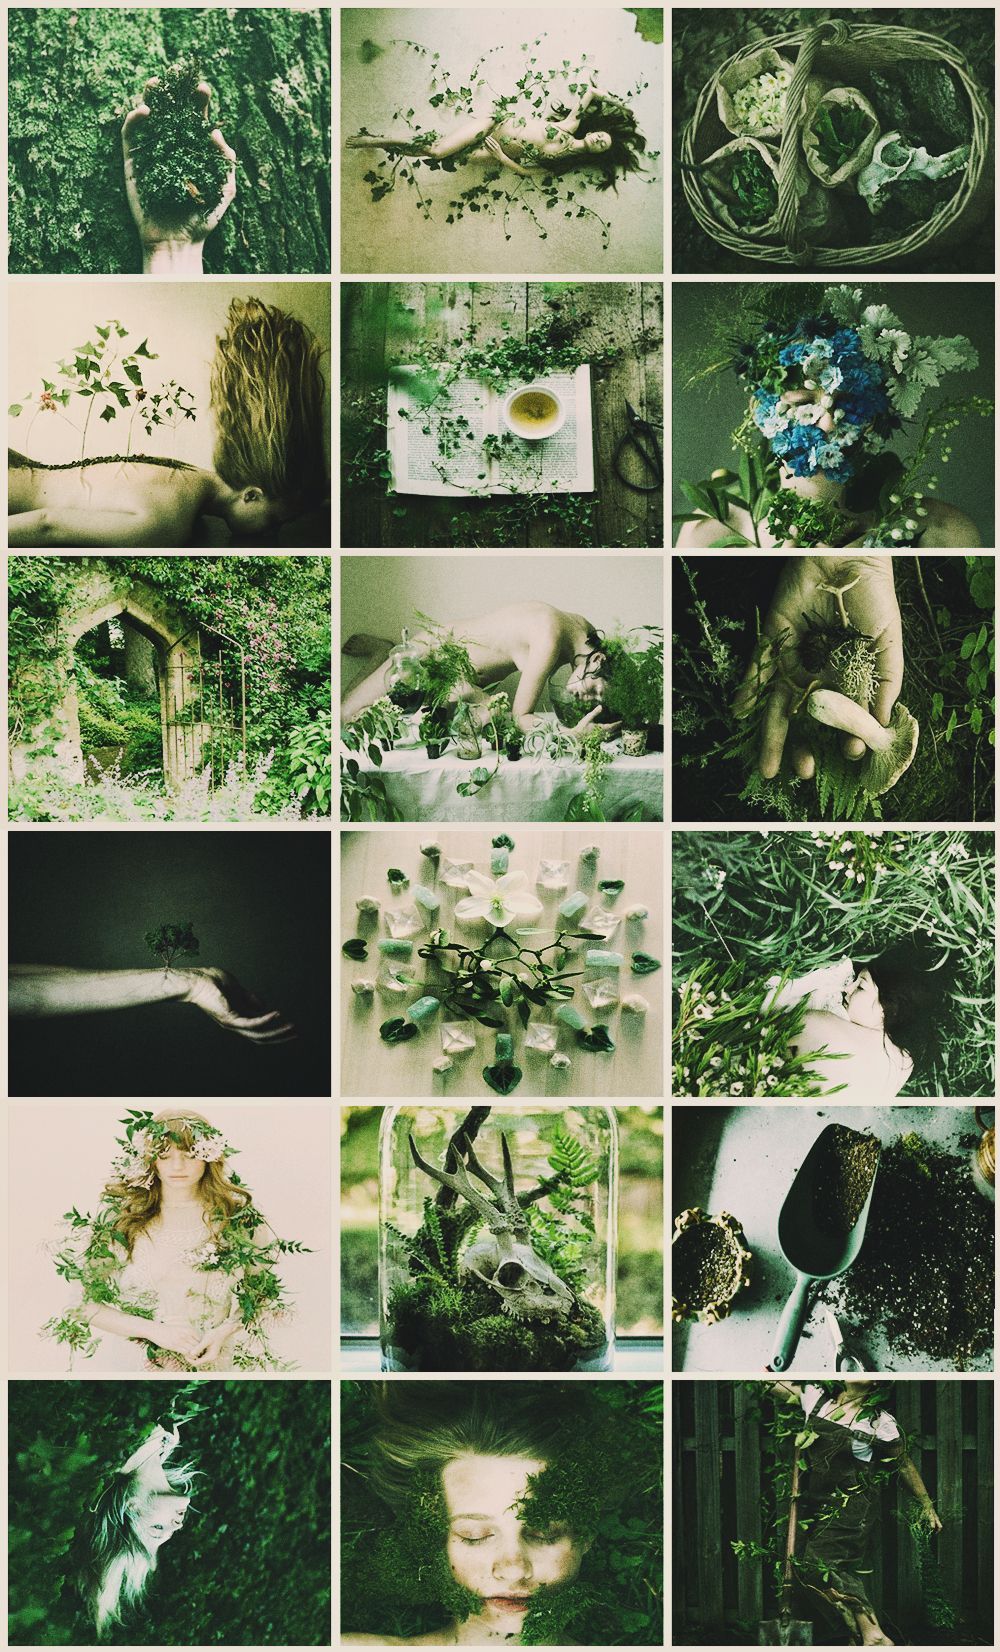 Aesthetic for a project I'm working on. All images are mine, unless otherwise credited. - Garden